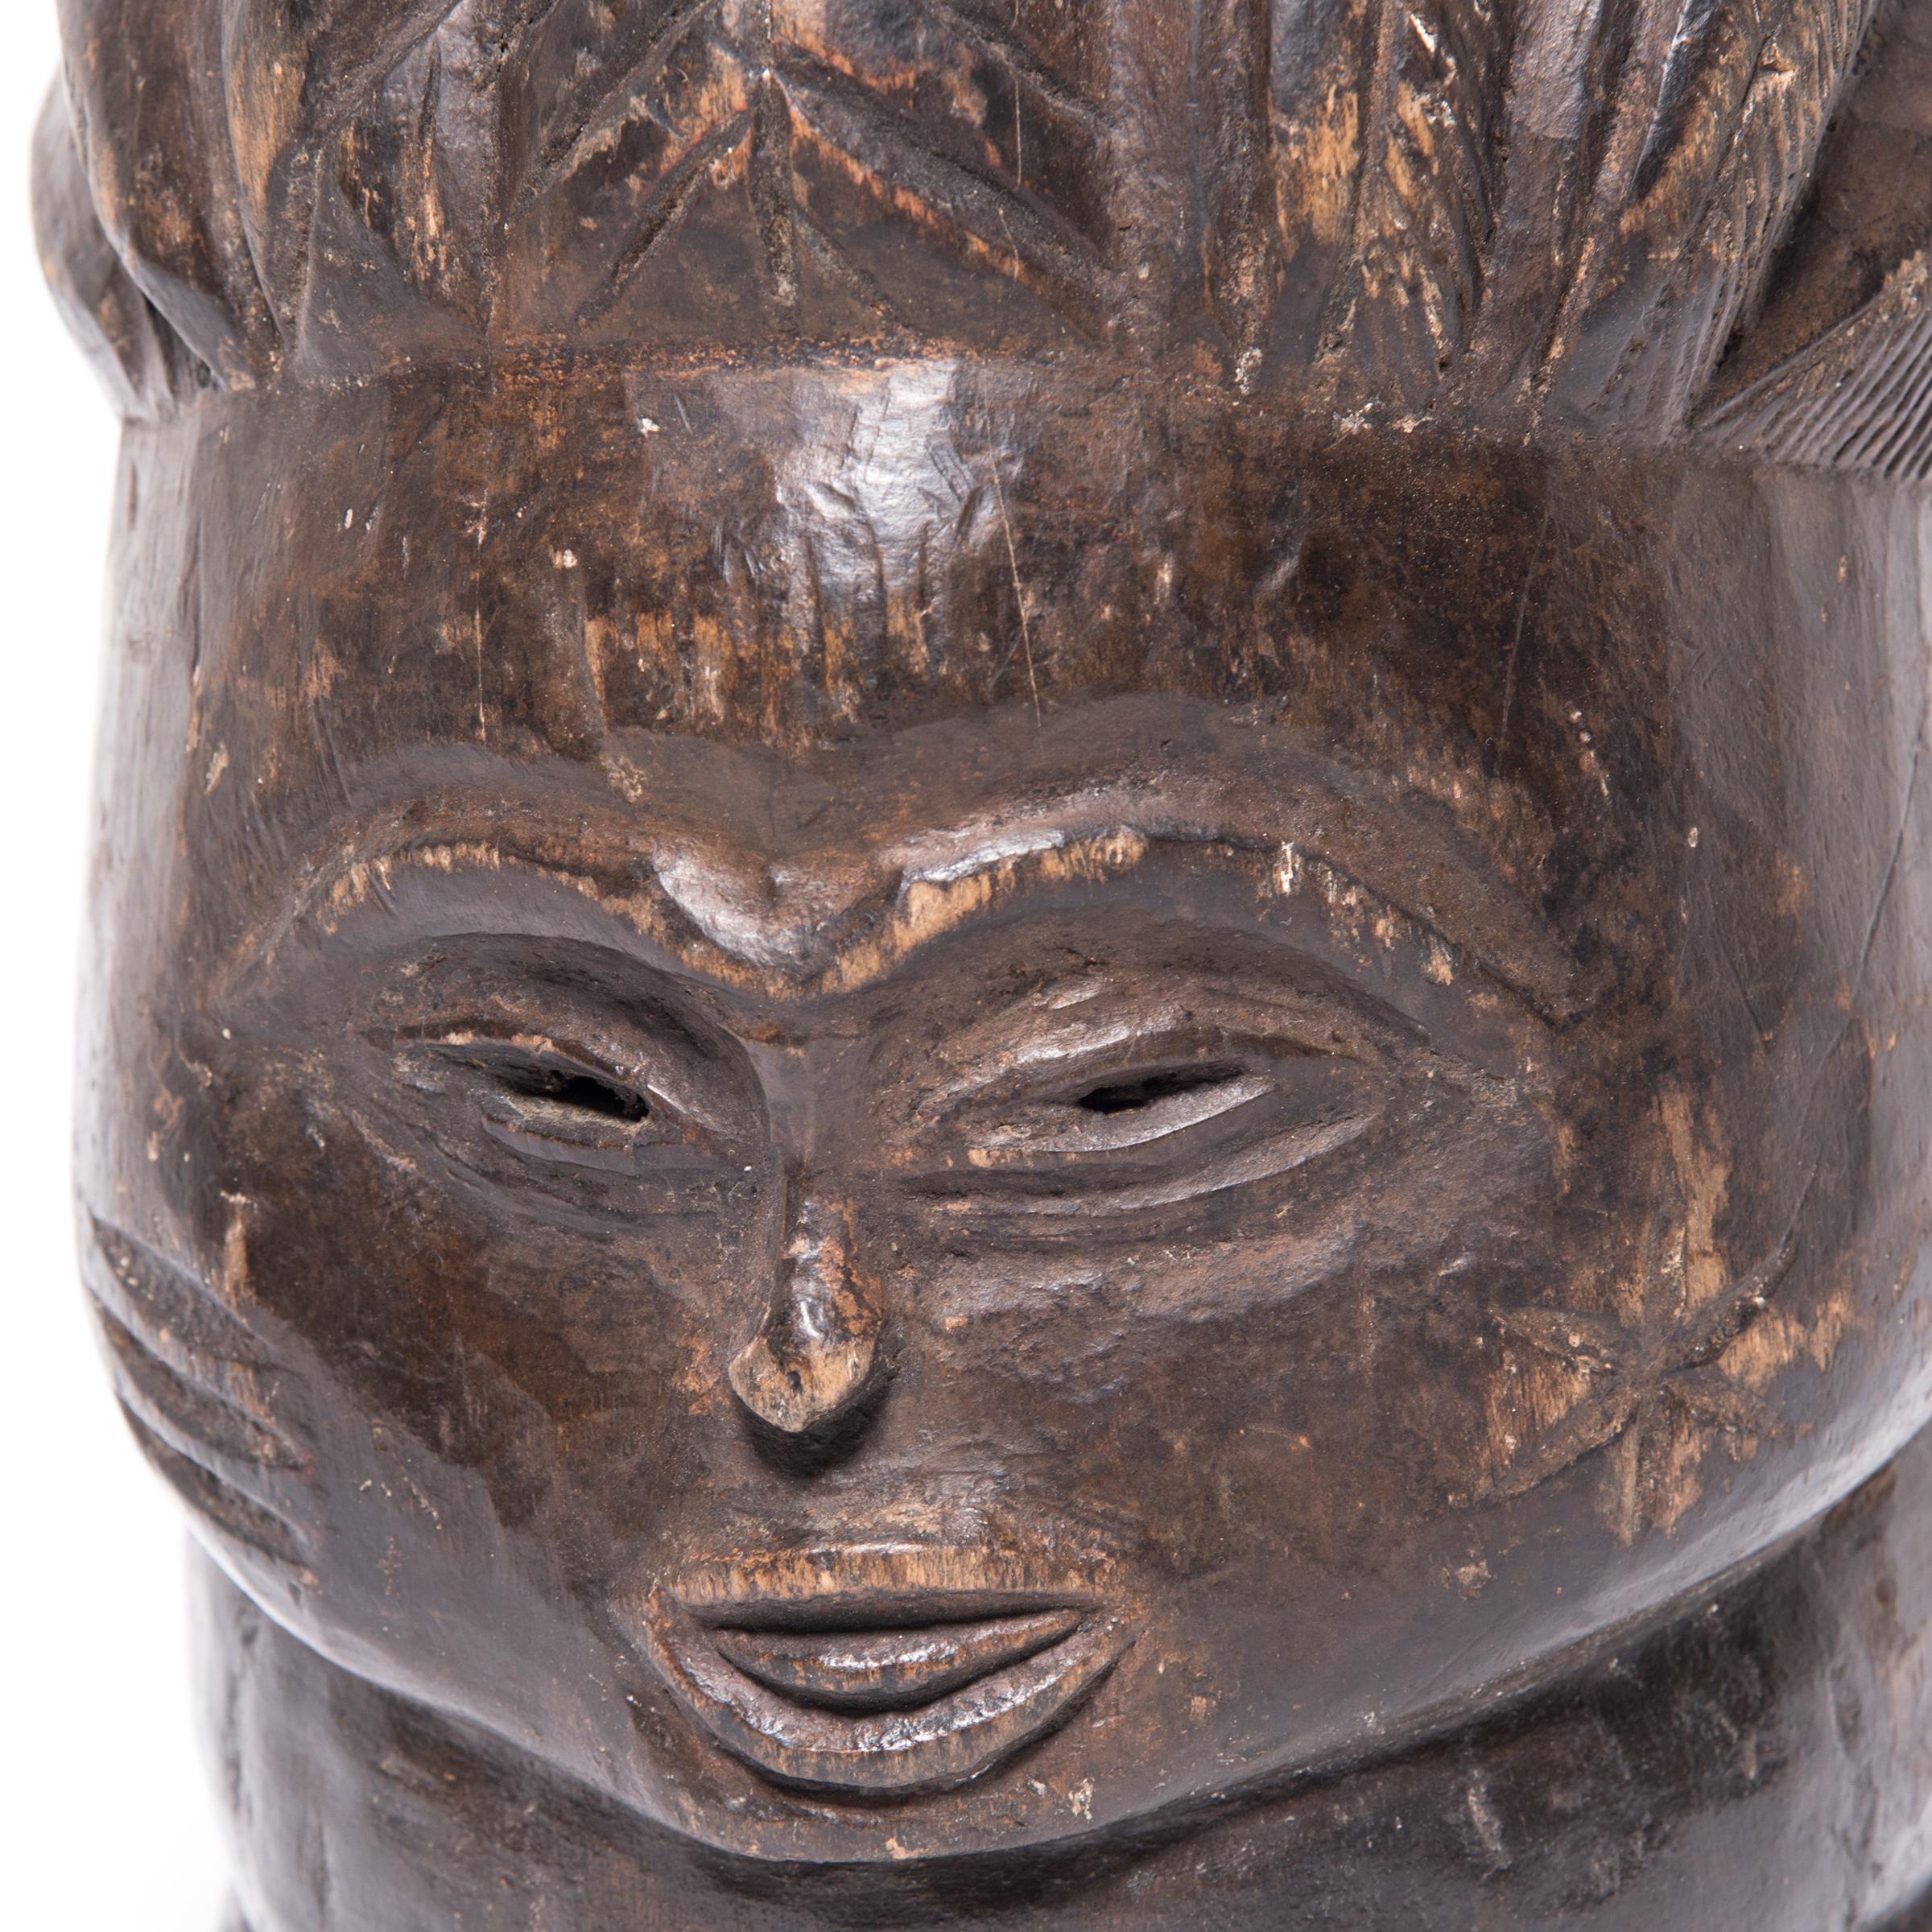 This helmet mask created by the Mende of Sierra Leone was made for the women of their tribe to wear while dancing. Commissioned by women for their initiation ceremonies, the masks were carved by men to depict the ideal female face. Designed to rest